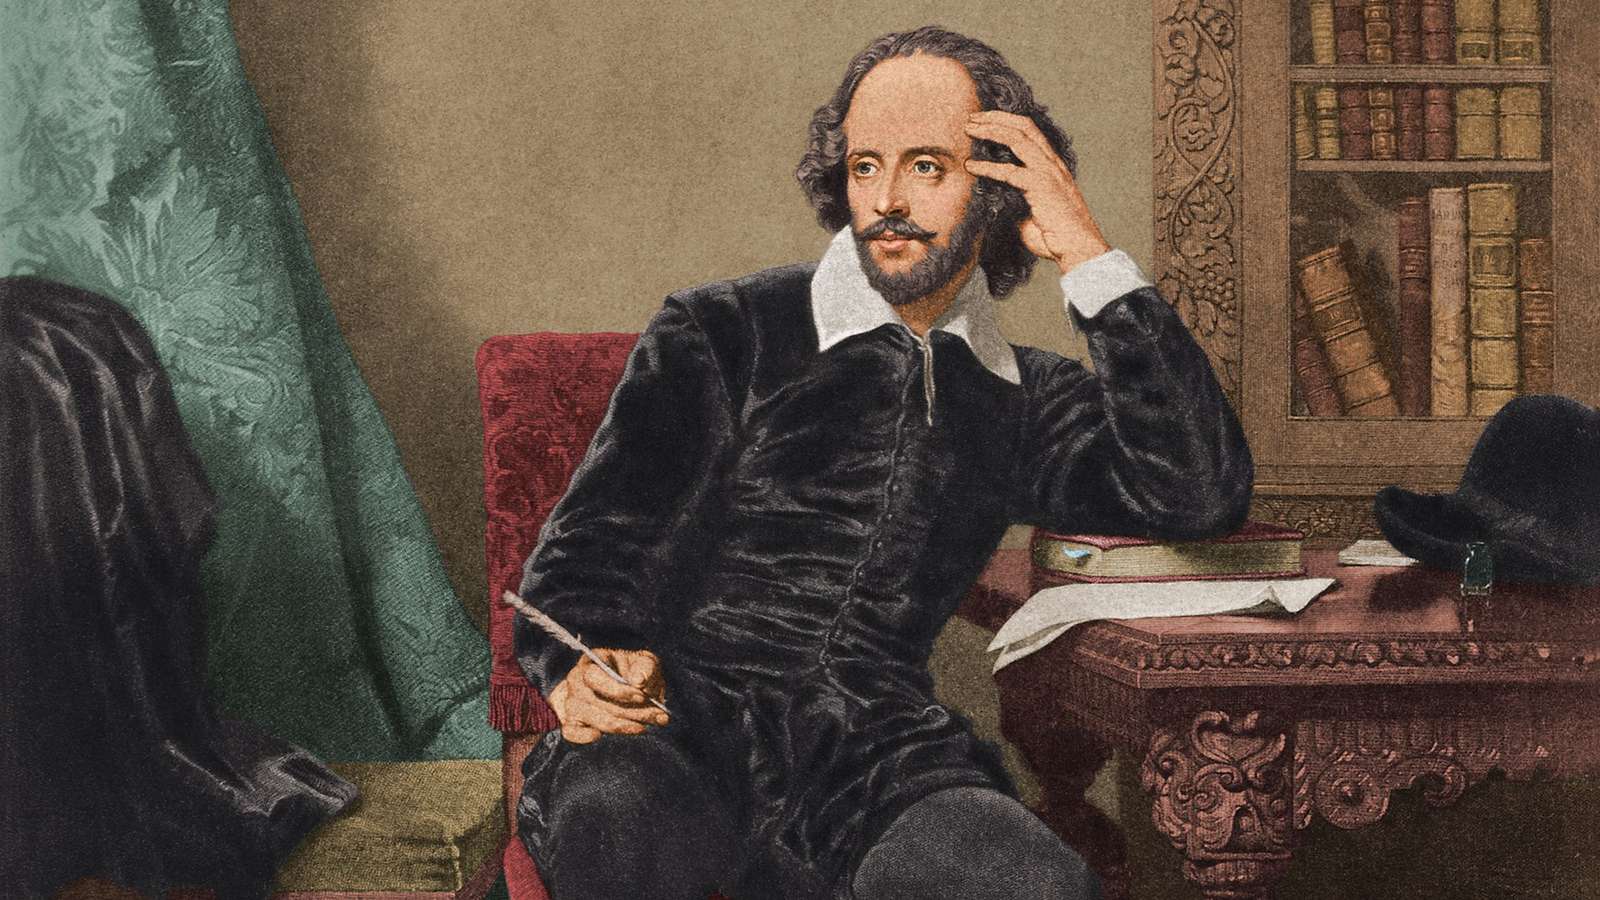 William Shakespeare puzzle online from photo